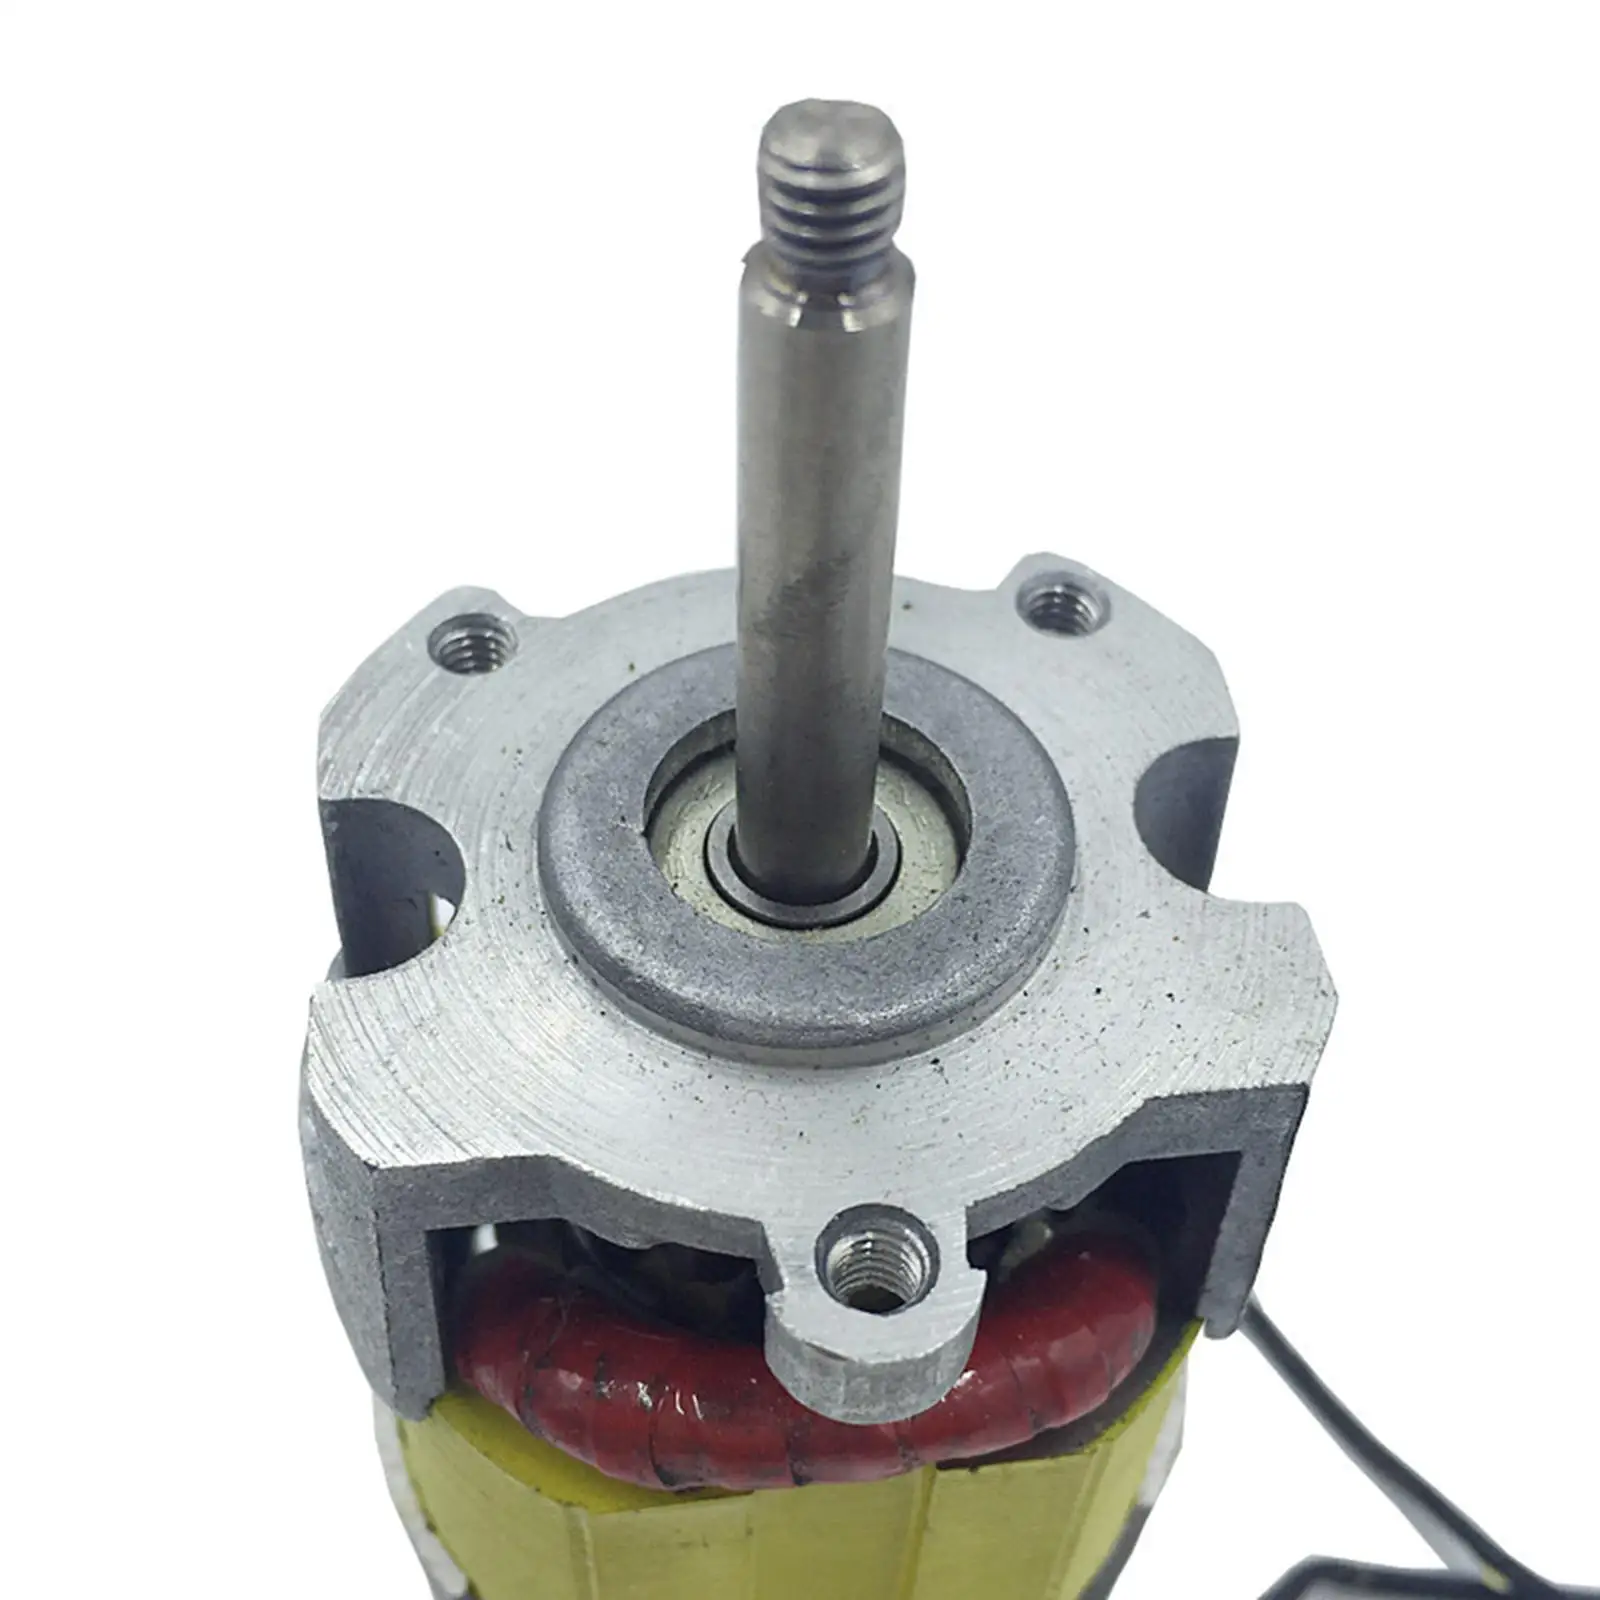 Hot Air Motor for Crafts, Shrinking, Paint for Home Workshop Good Sealing Quality Sand Steel Sheet 1600W Hot Air Motor